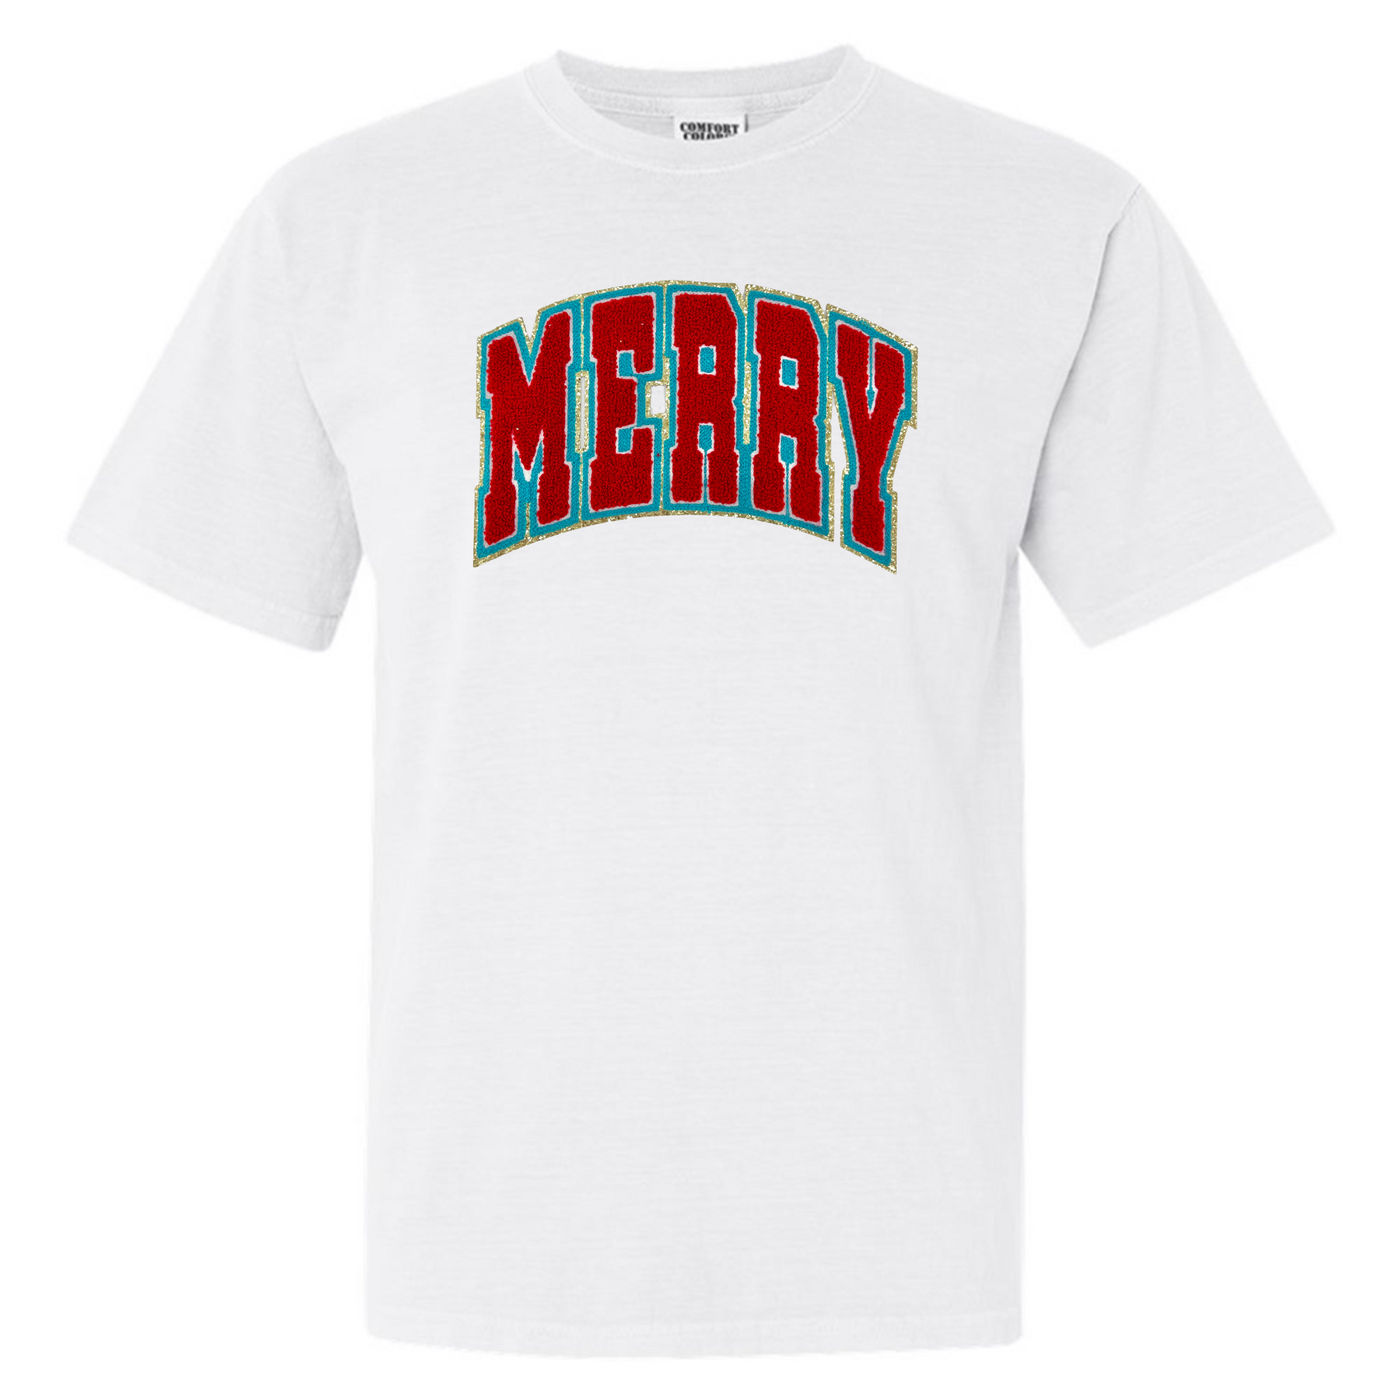 'Varsity Merry' Letter Patch Tee